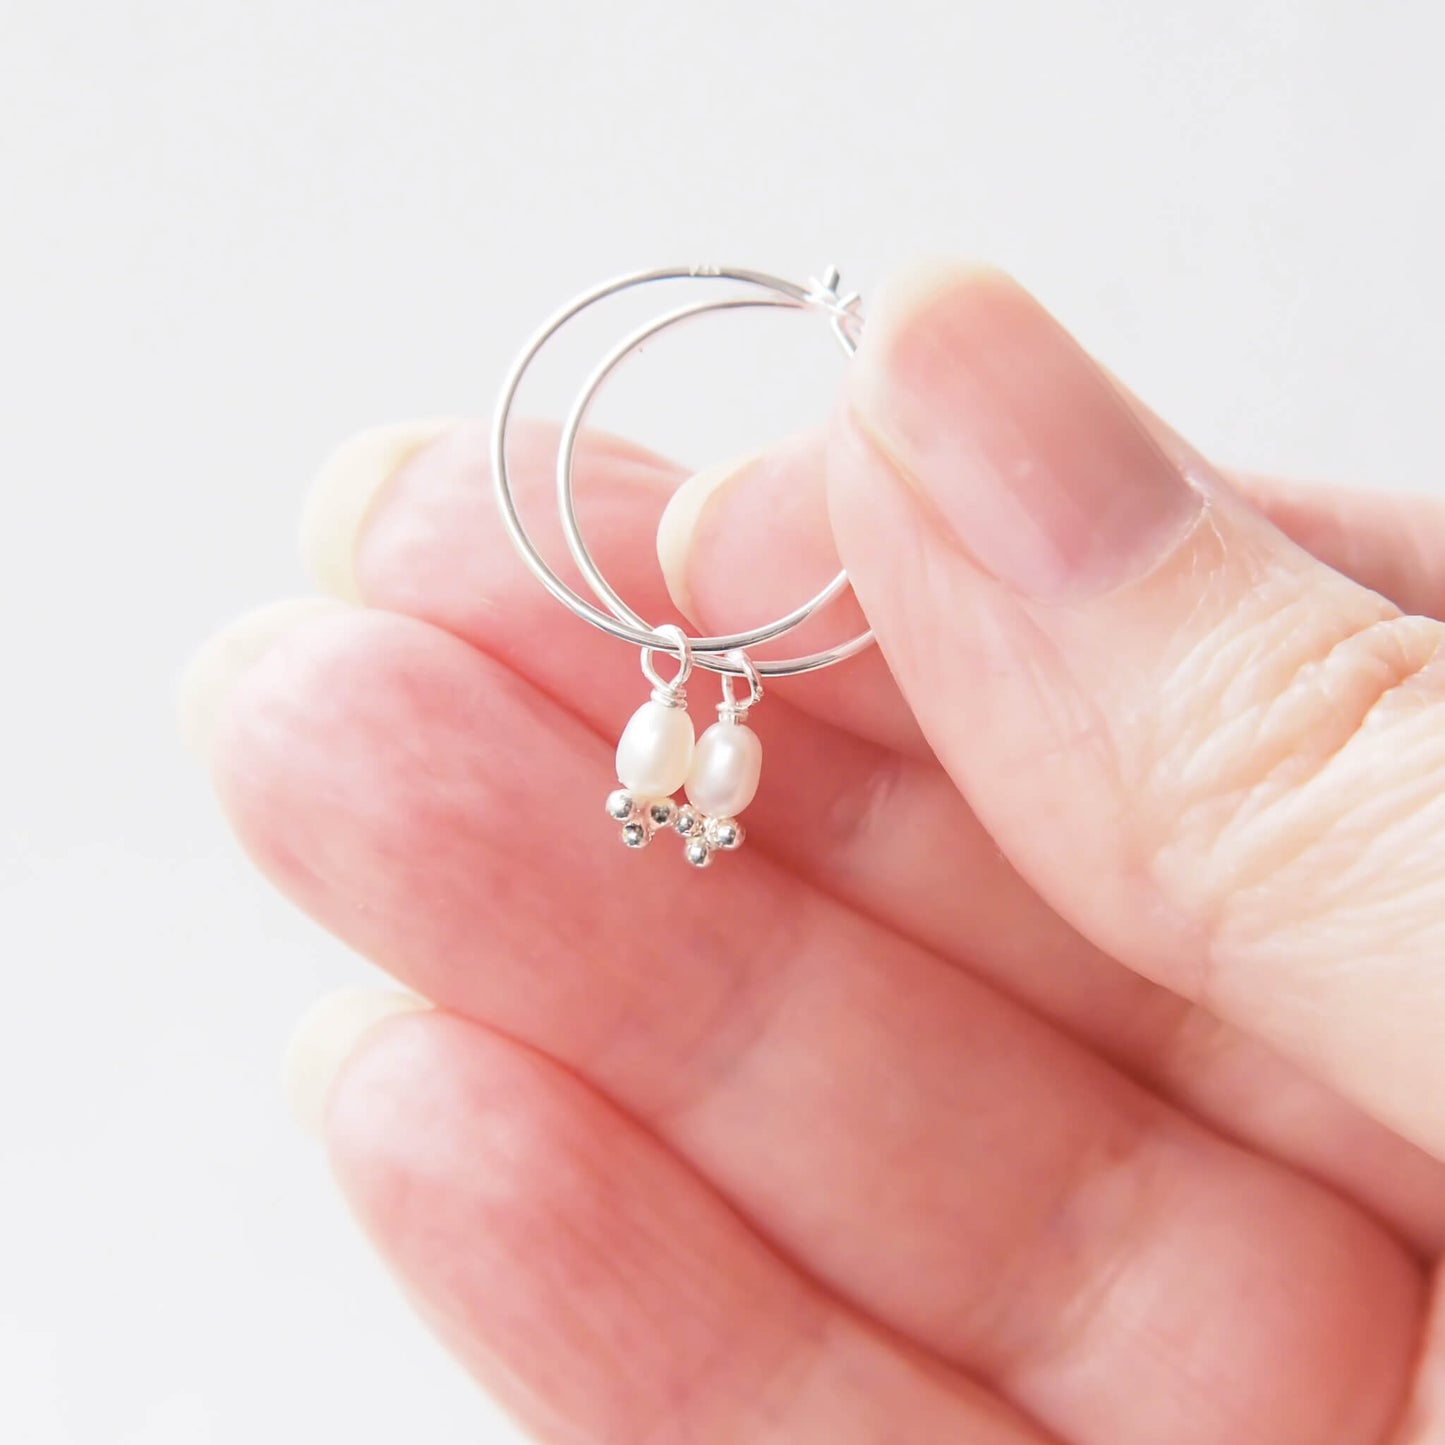 Pearl Birthstone hoop earrings held in hand to show scale. thin sterling silver wire with a freshwater pearl charm dangle. Handmade by maram jewellery in UK